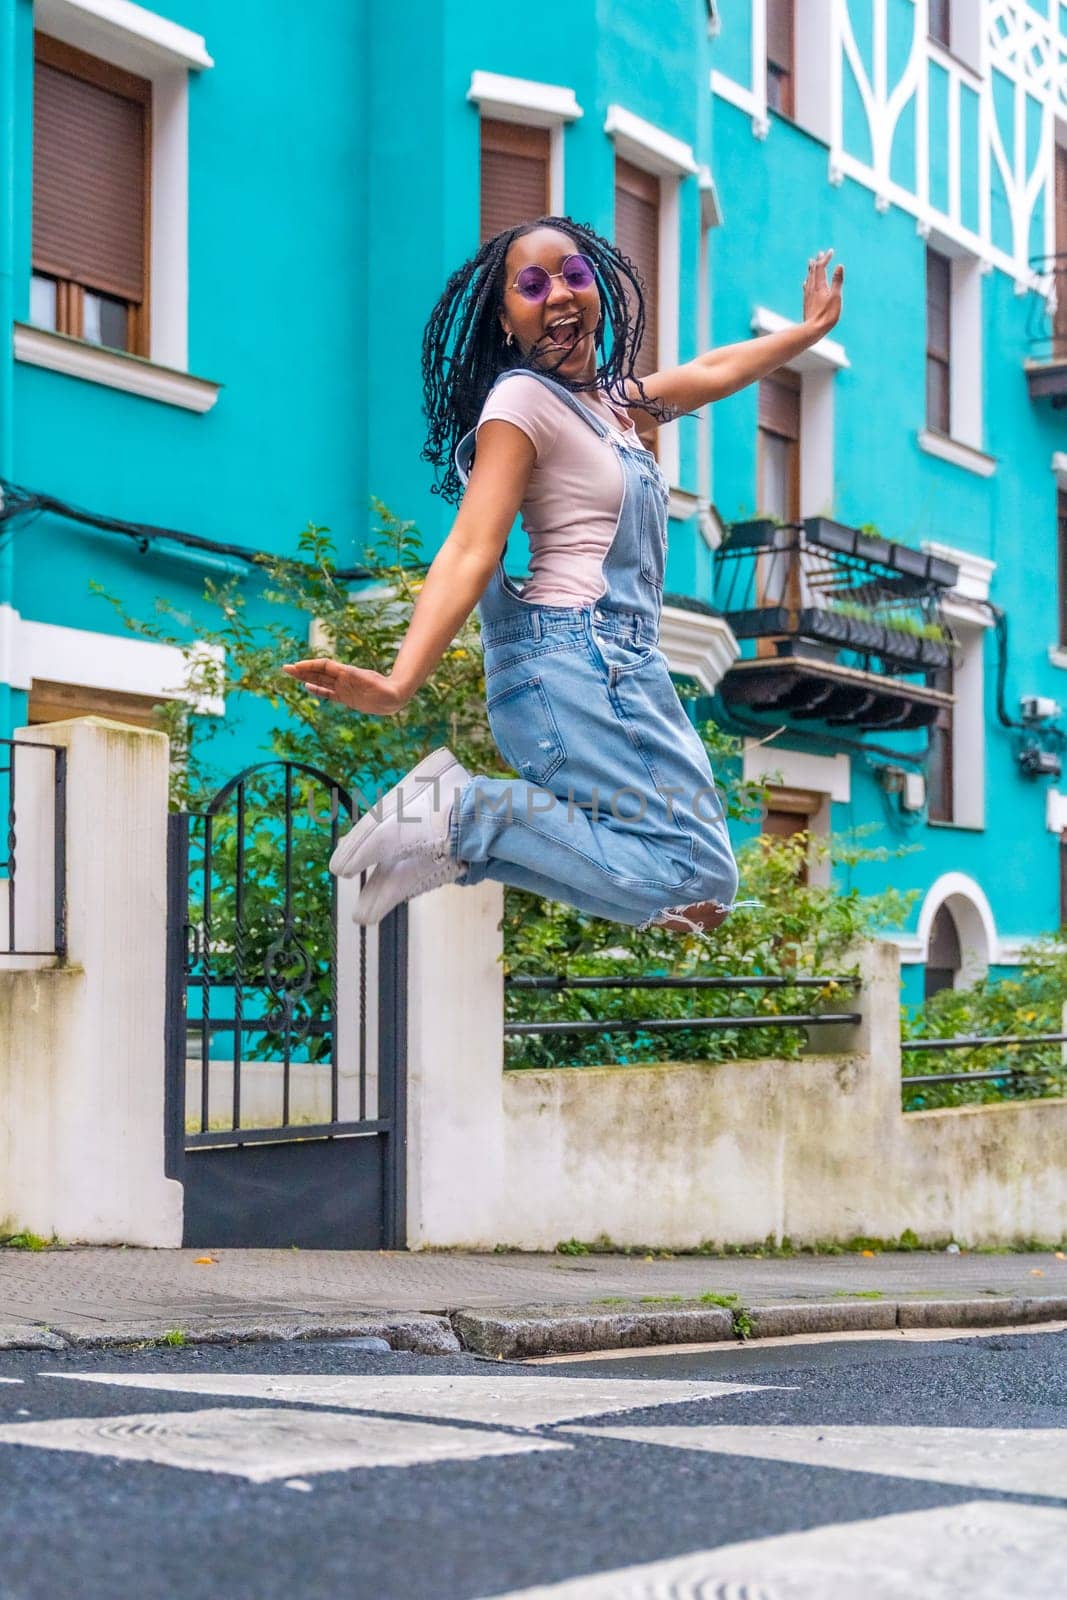 African young woman jumping in a street with colorful houses by Huizi